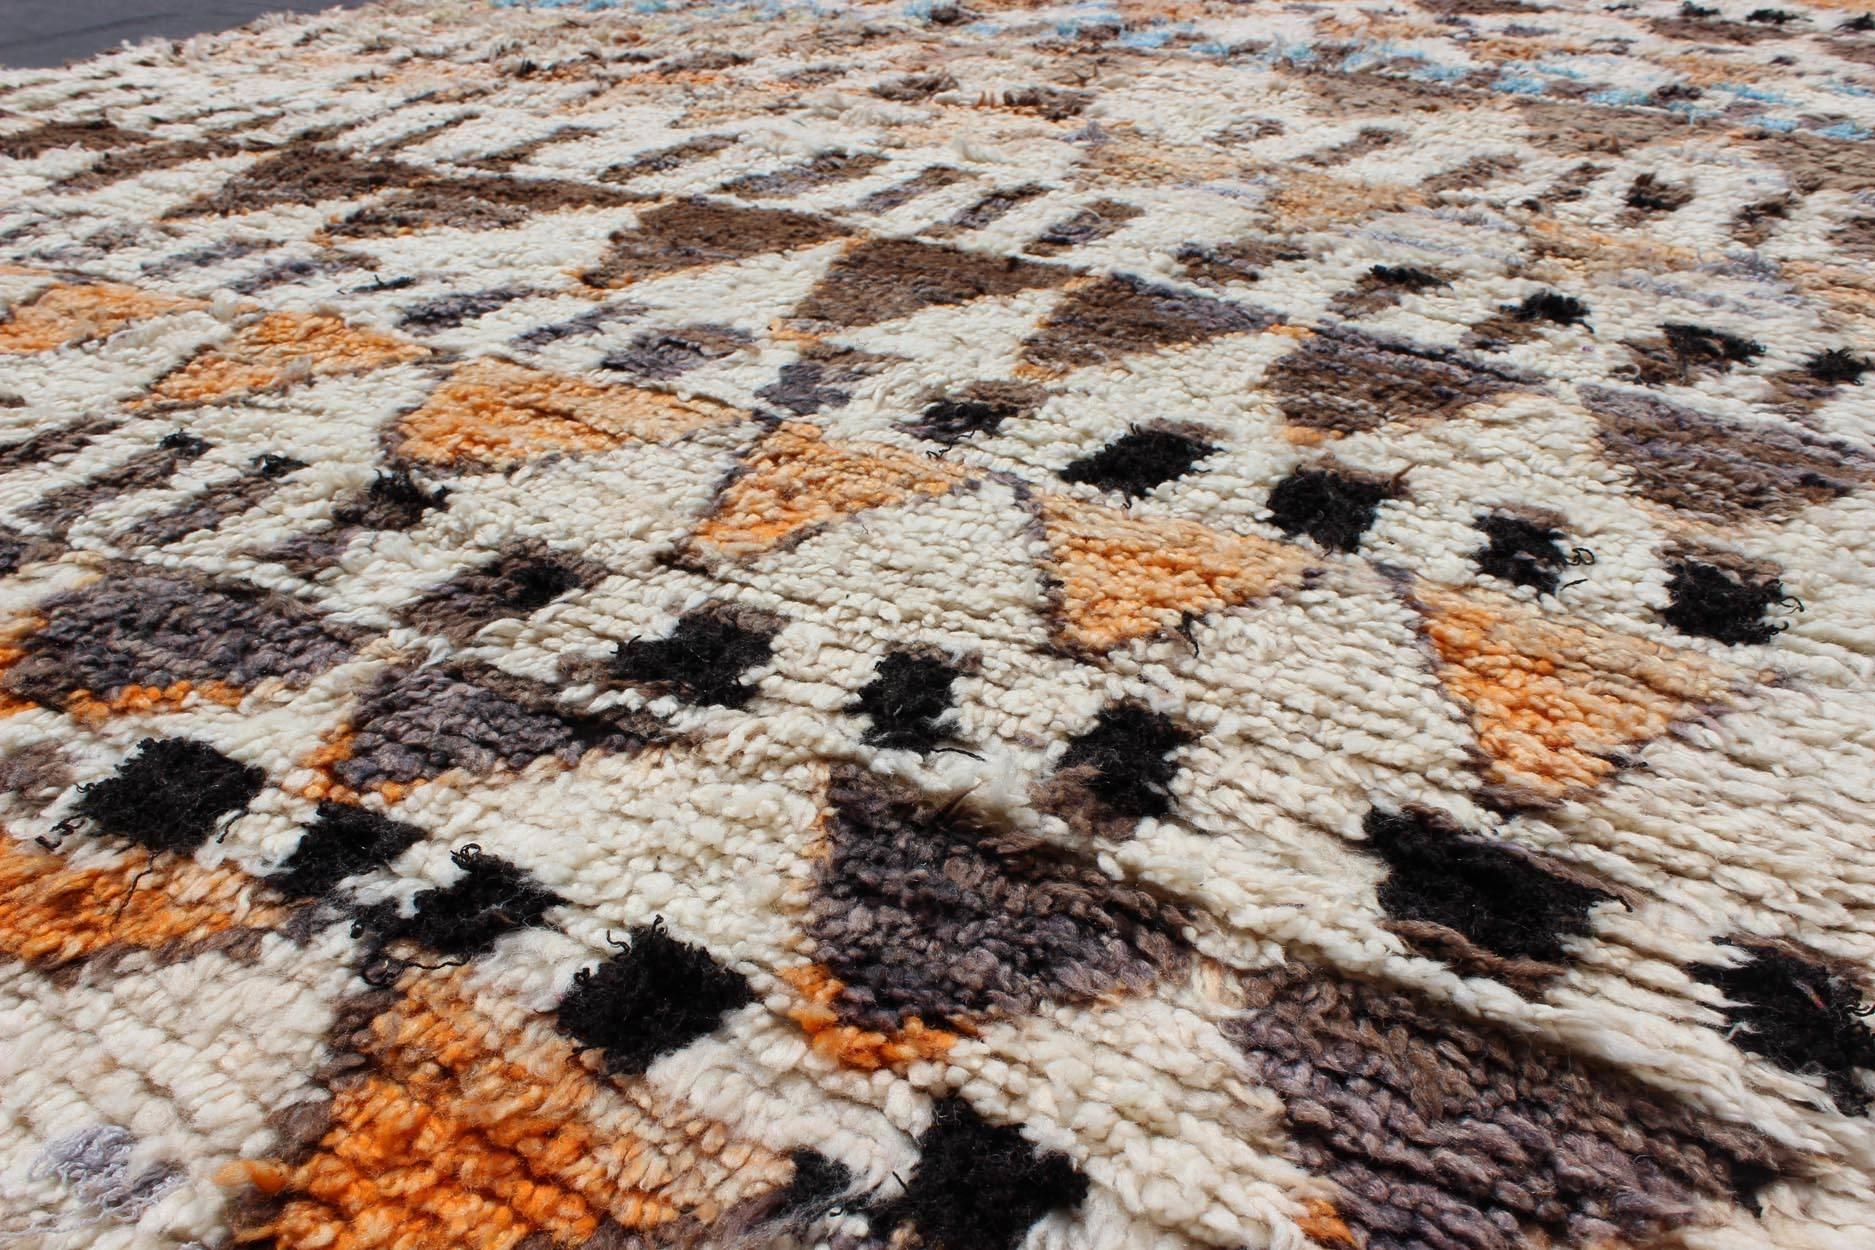 Hand-Knotted Vintage Moroccan Azilal Rug in Natural Creams, Browns and Muted Orange For Sale